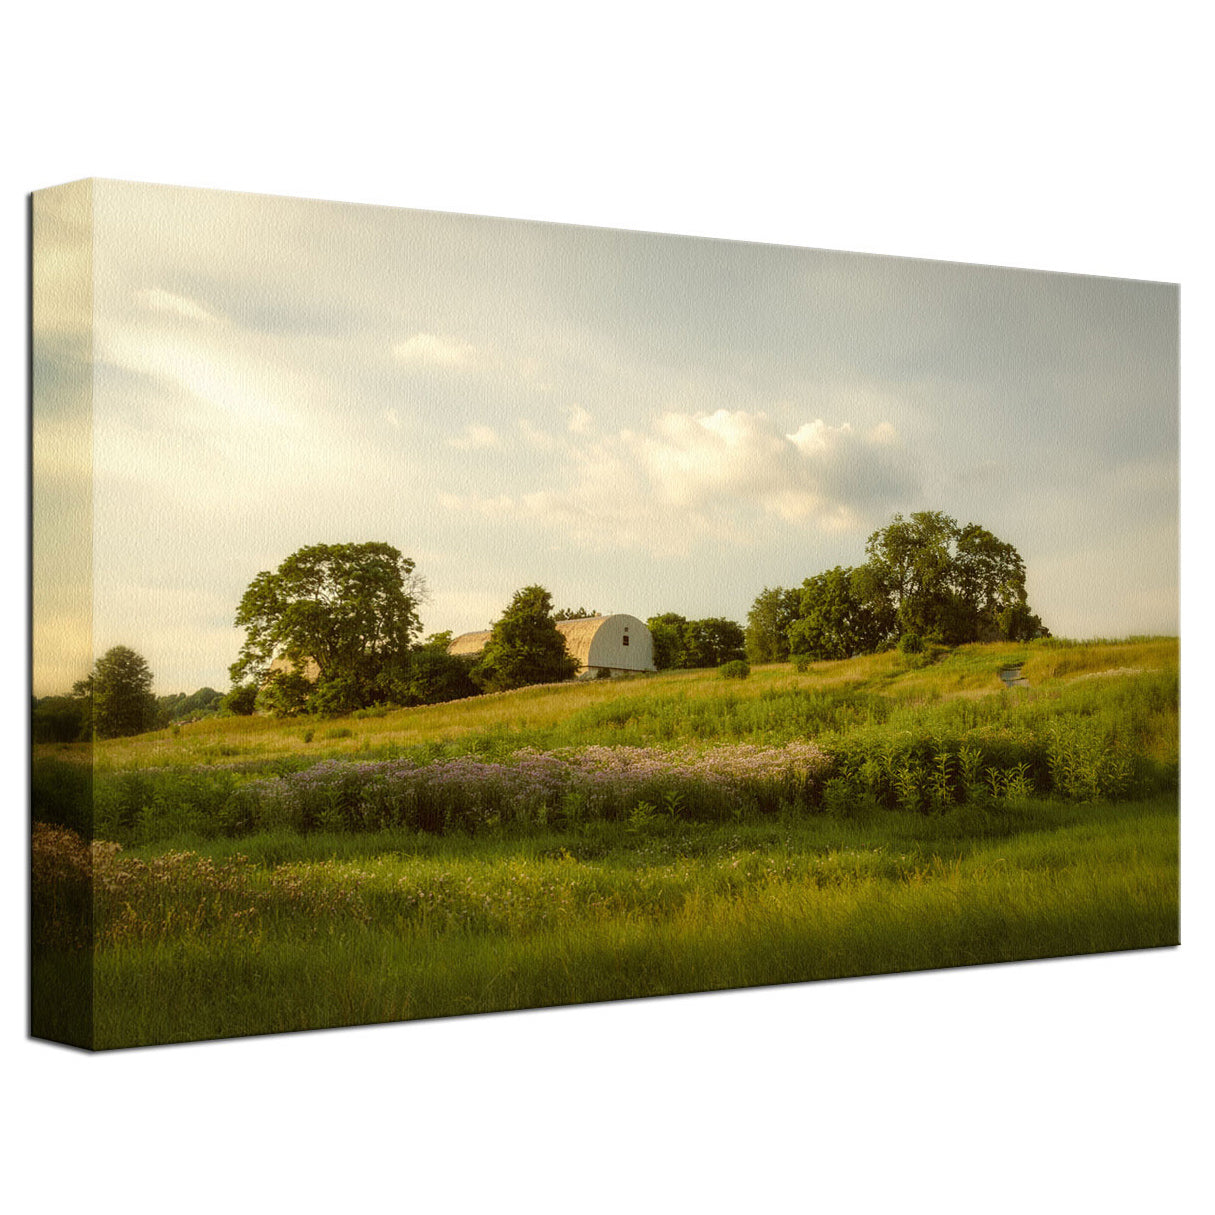 Remnant of Better Days Landscape Photo Fine Art Canvas Wall Art Prints  - PIPAFINEART